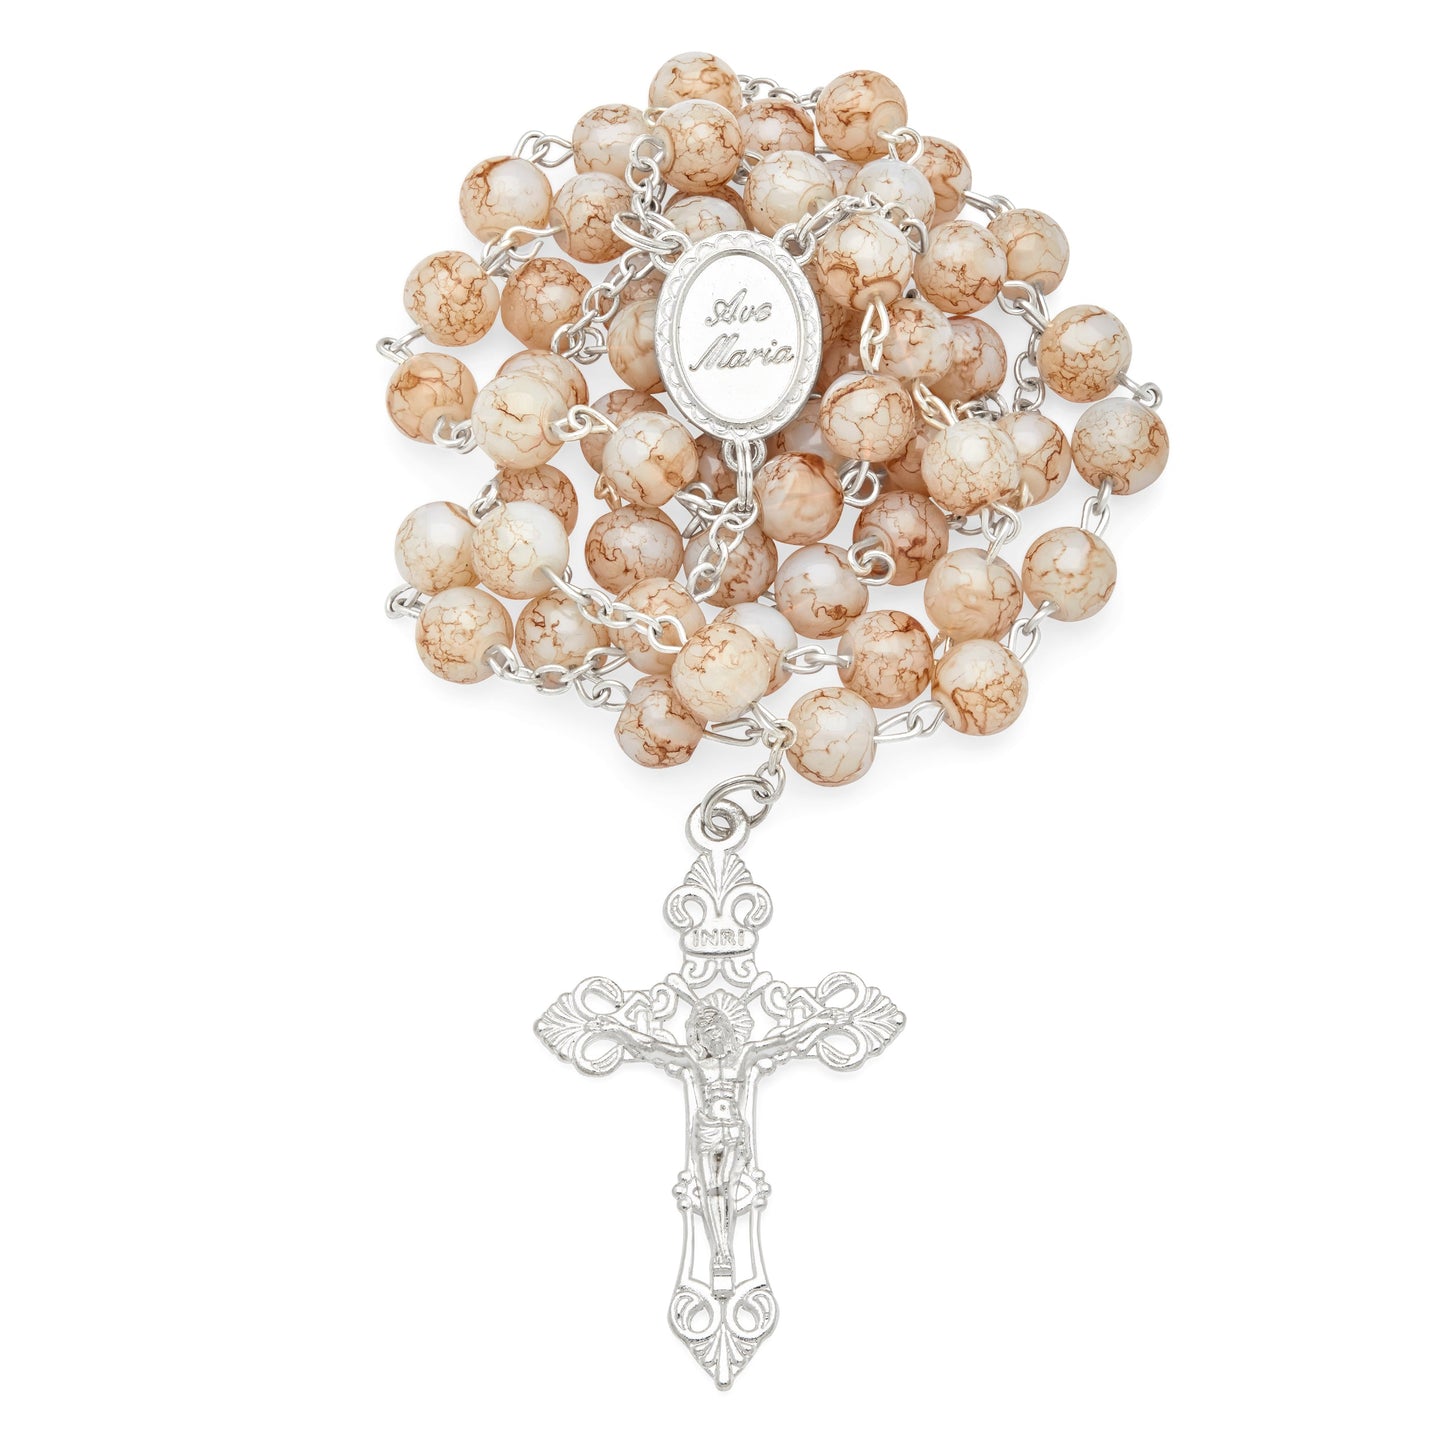 MONDO CATTOLICO Prayer Beads 55 cm (21.65 in) / 8 mm (0.3 in) Rose Marble Glass Rosary and Case